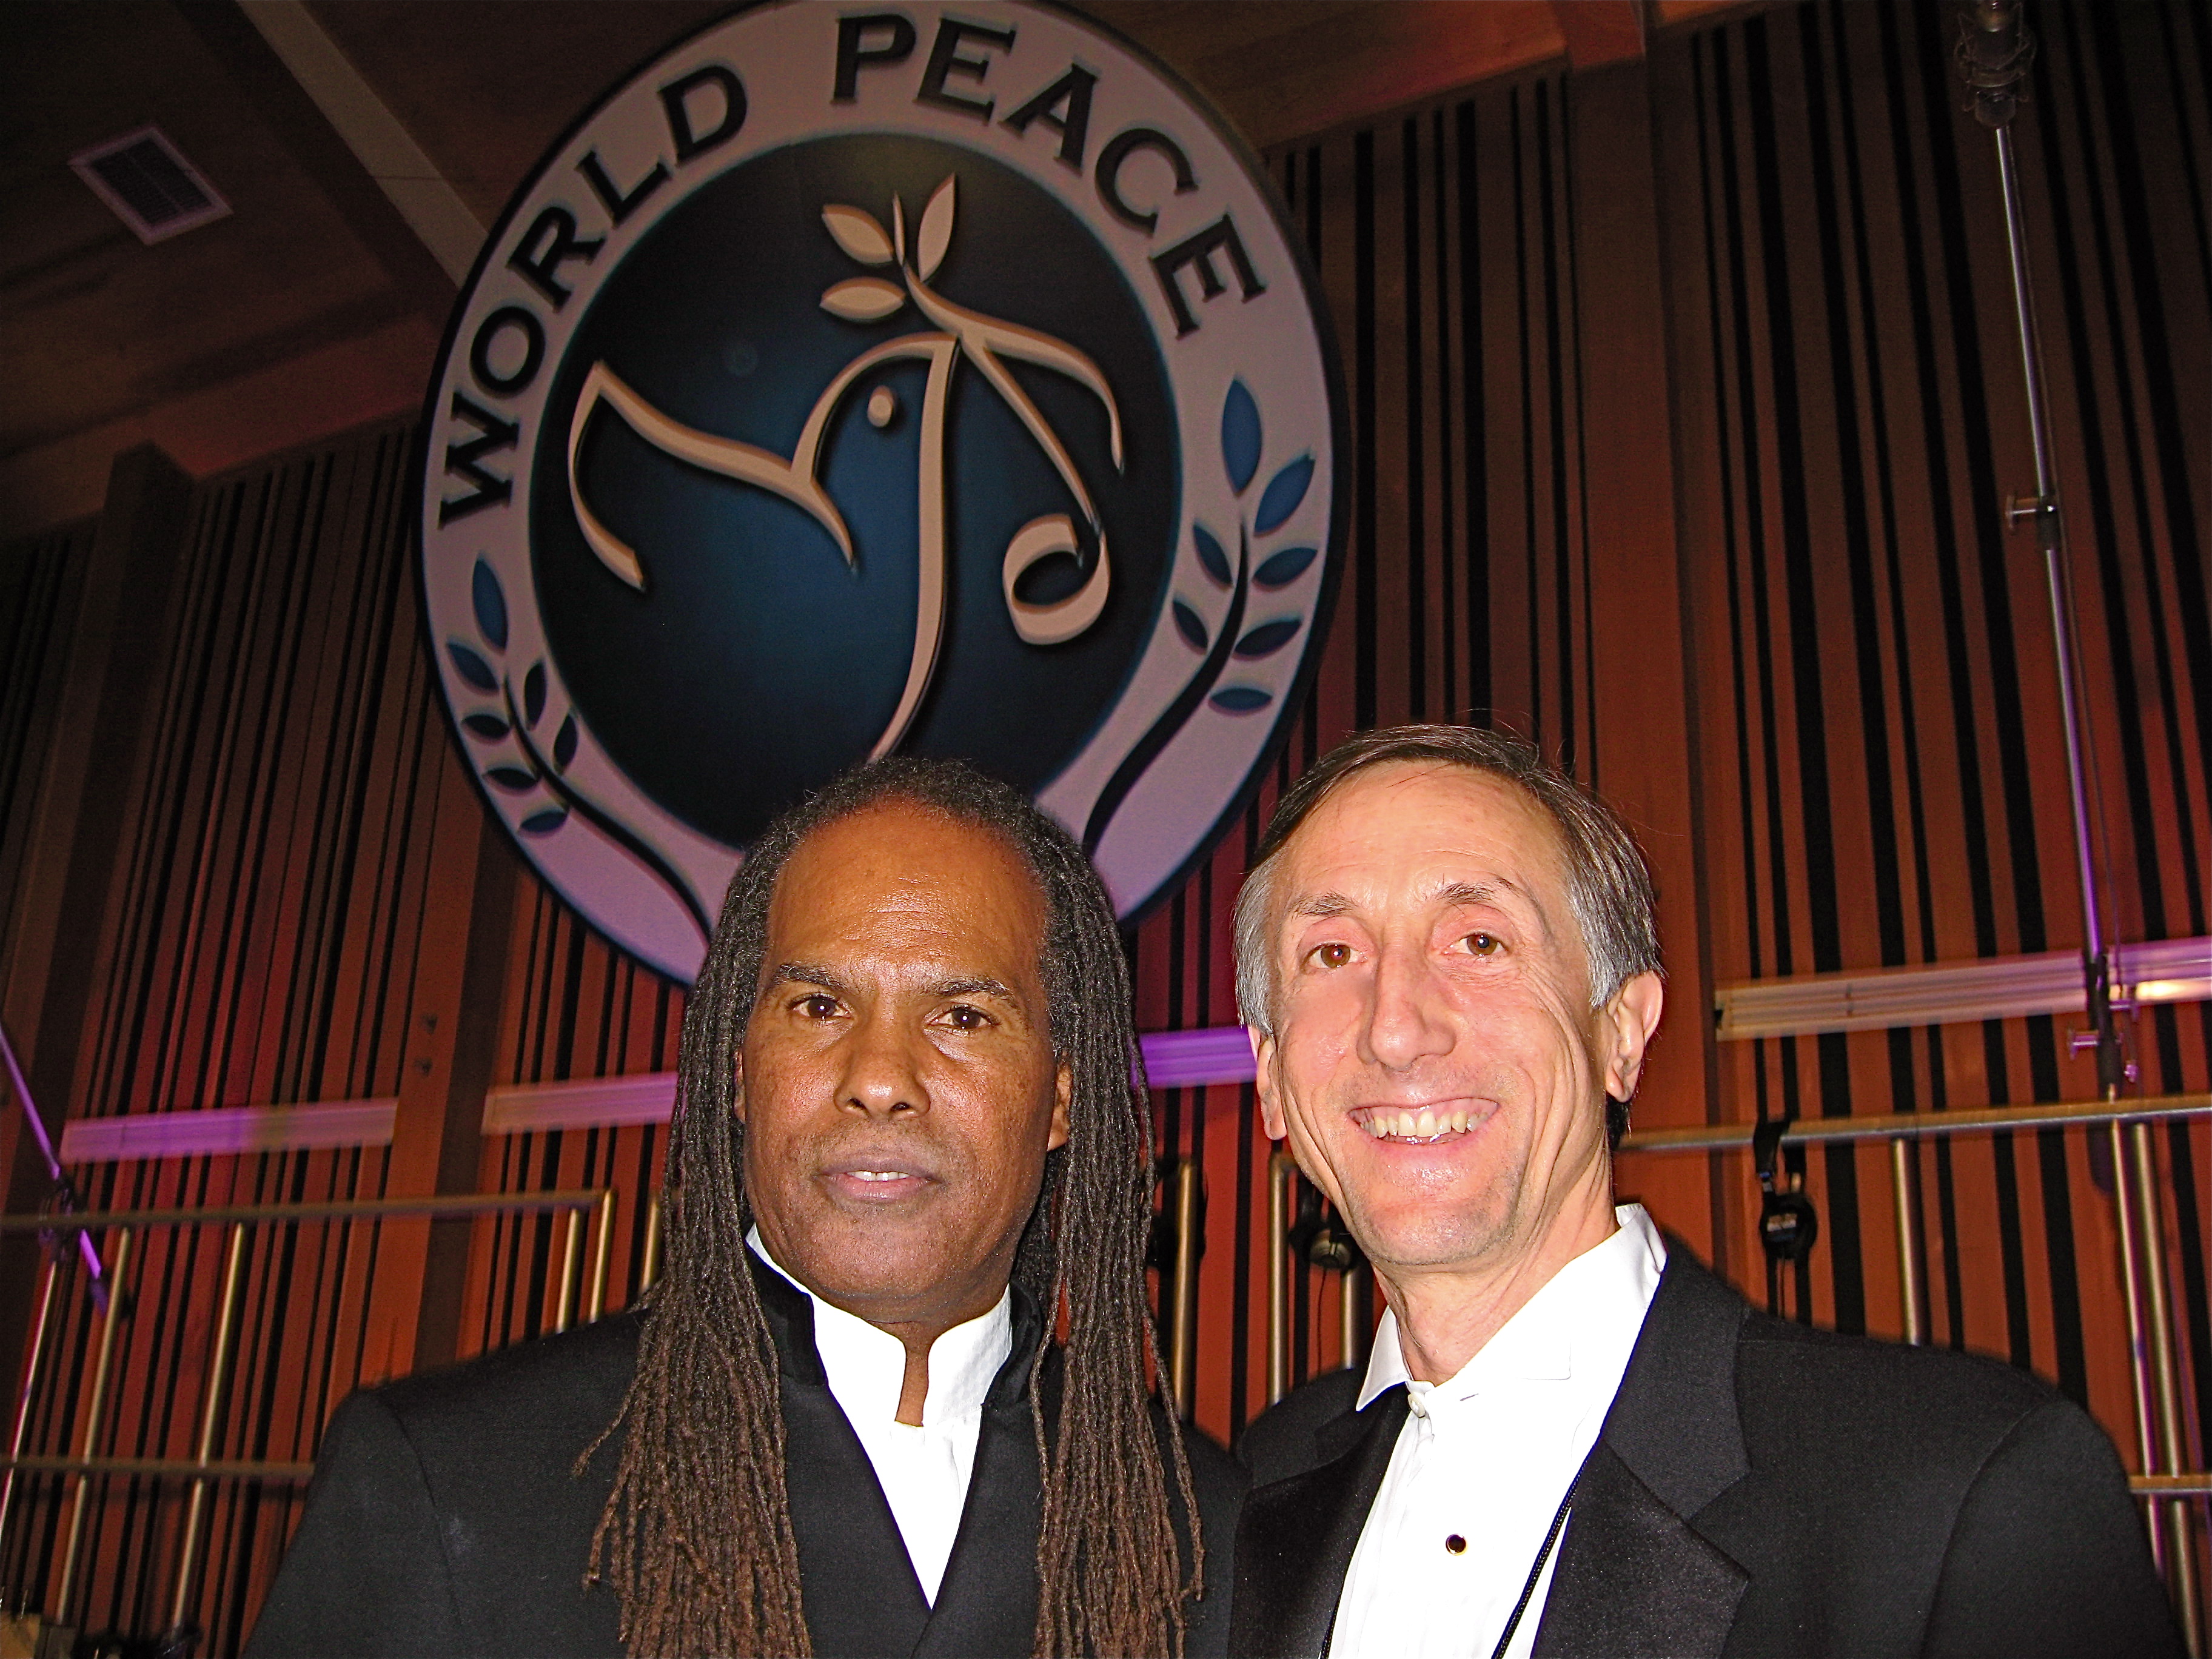 Kit Thomas (r), Michael Beckwith (l) at World Peace One session, Feb. 2007